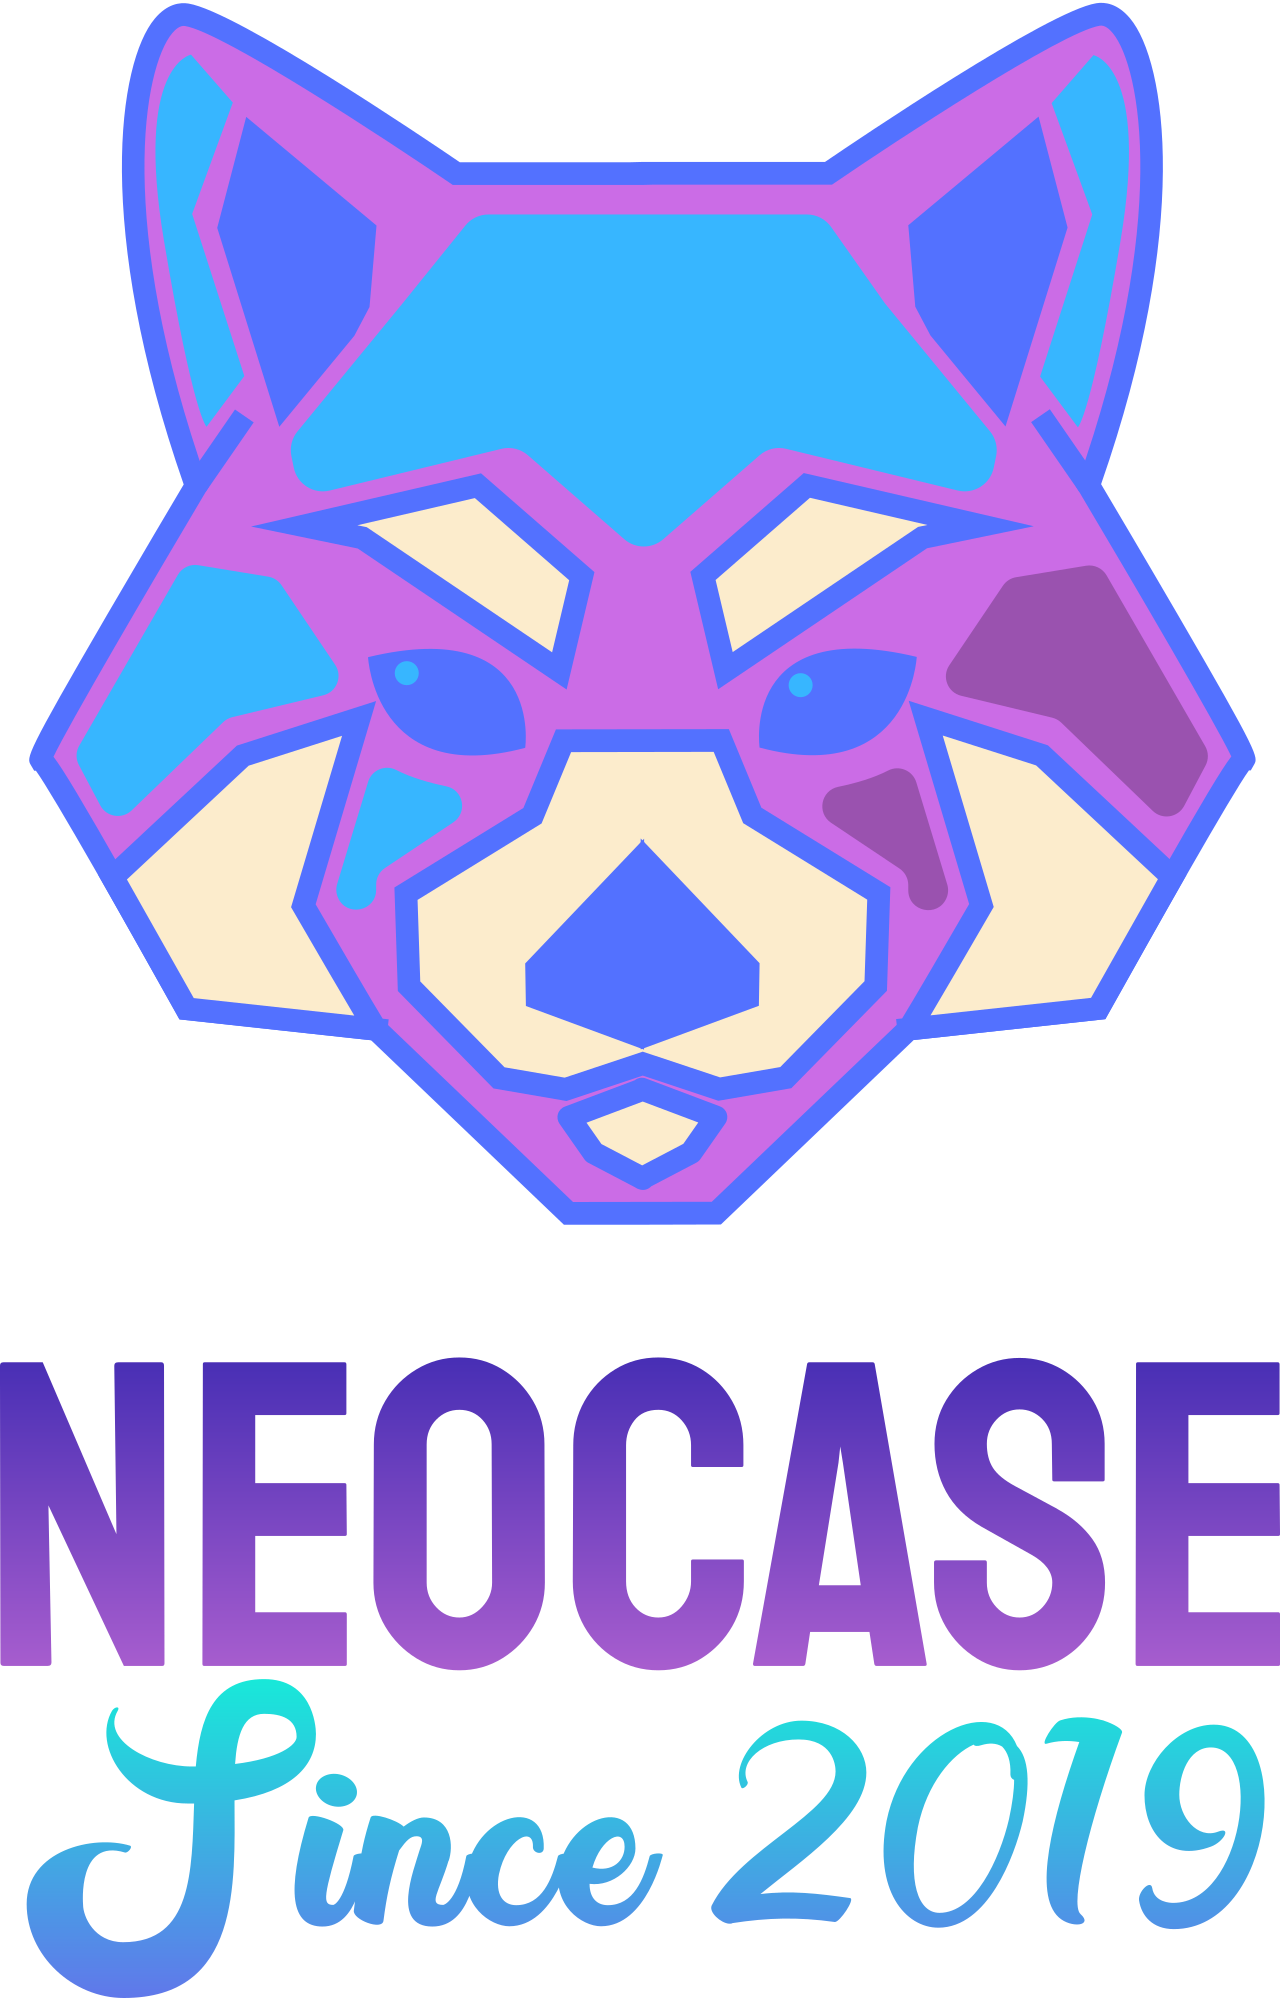 NeoCase's web page